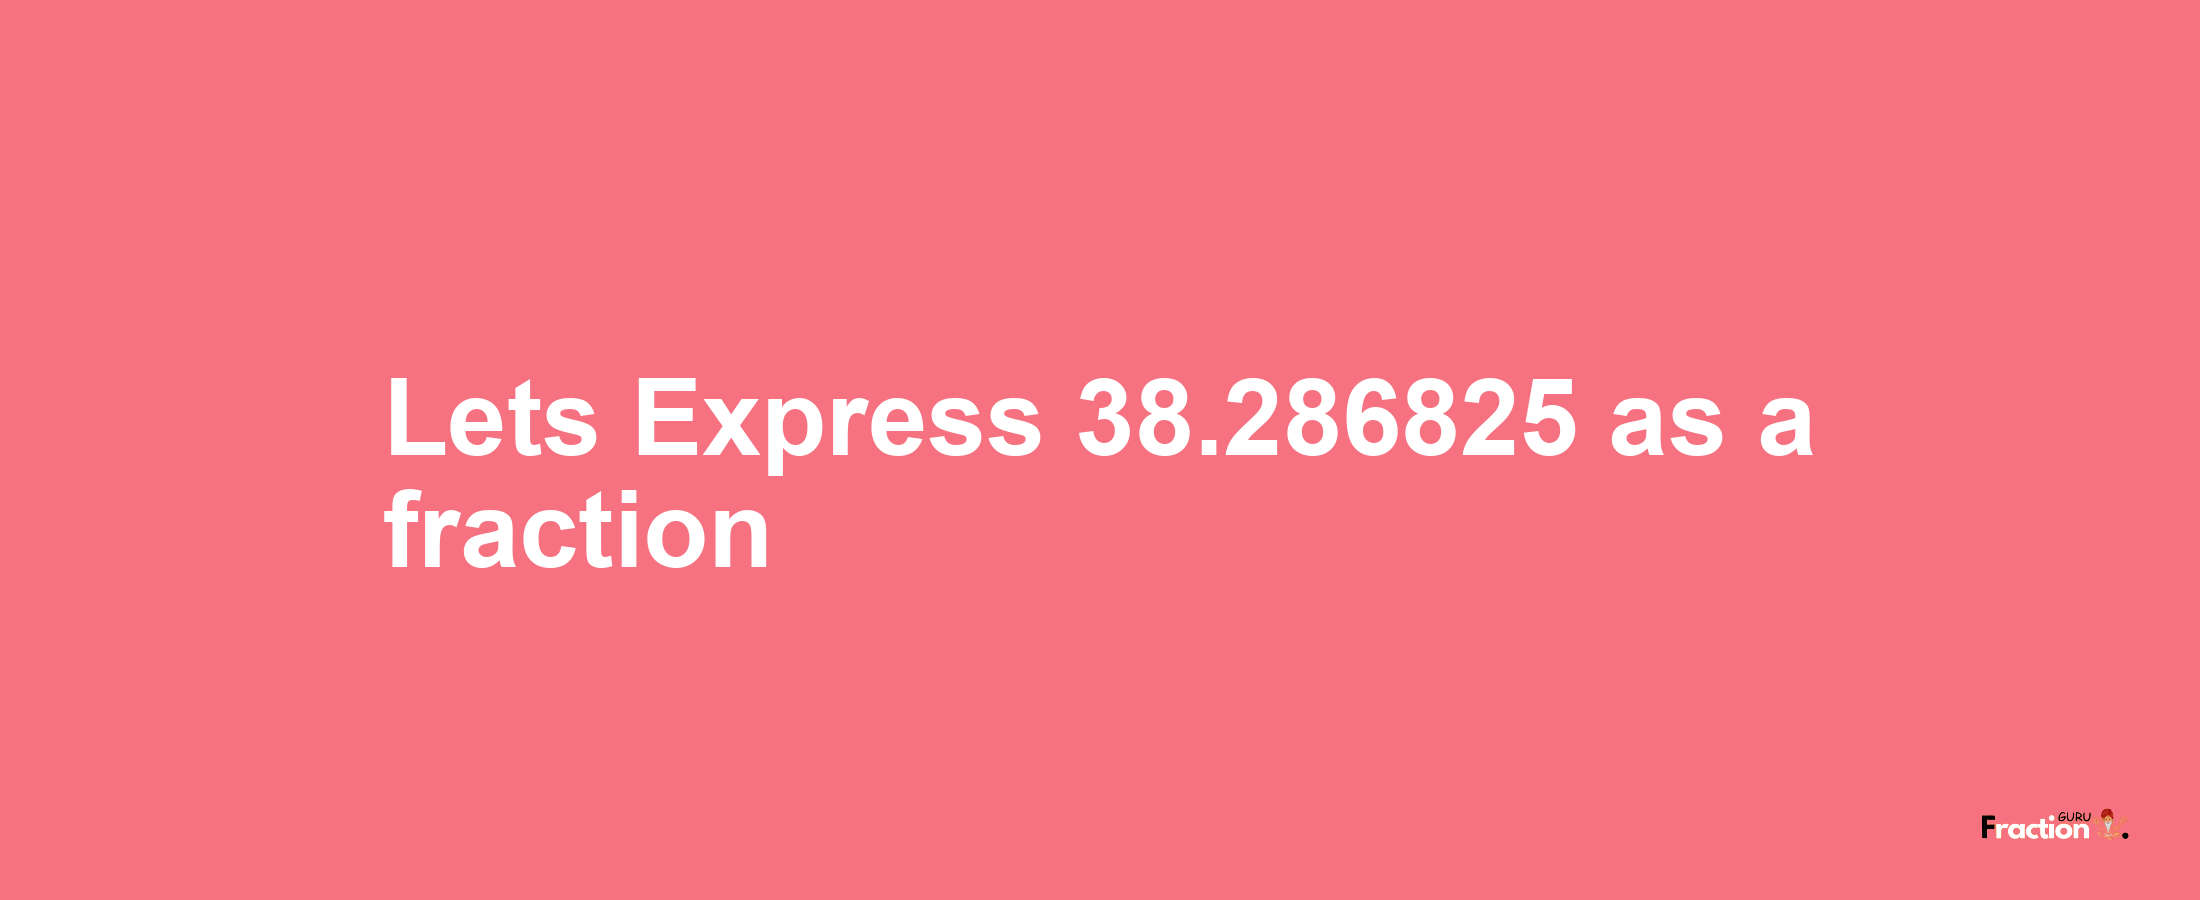 Lets Express 38.286825 as afraction